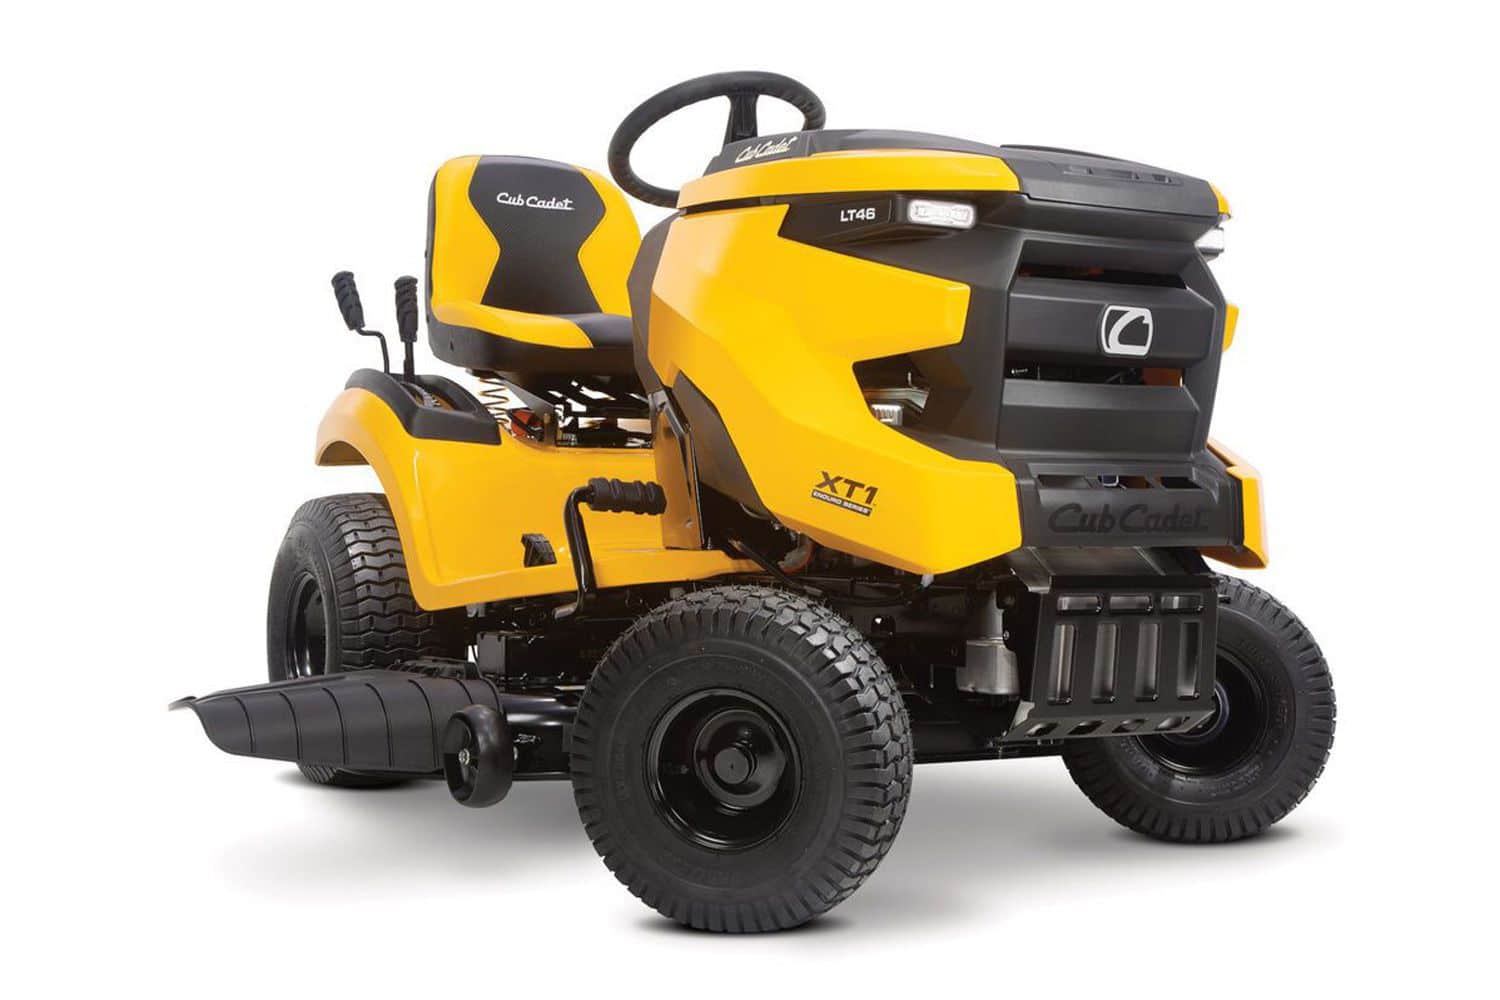 What is the Best Riding Lawn Mower for Rough Terrain